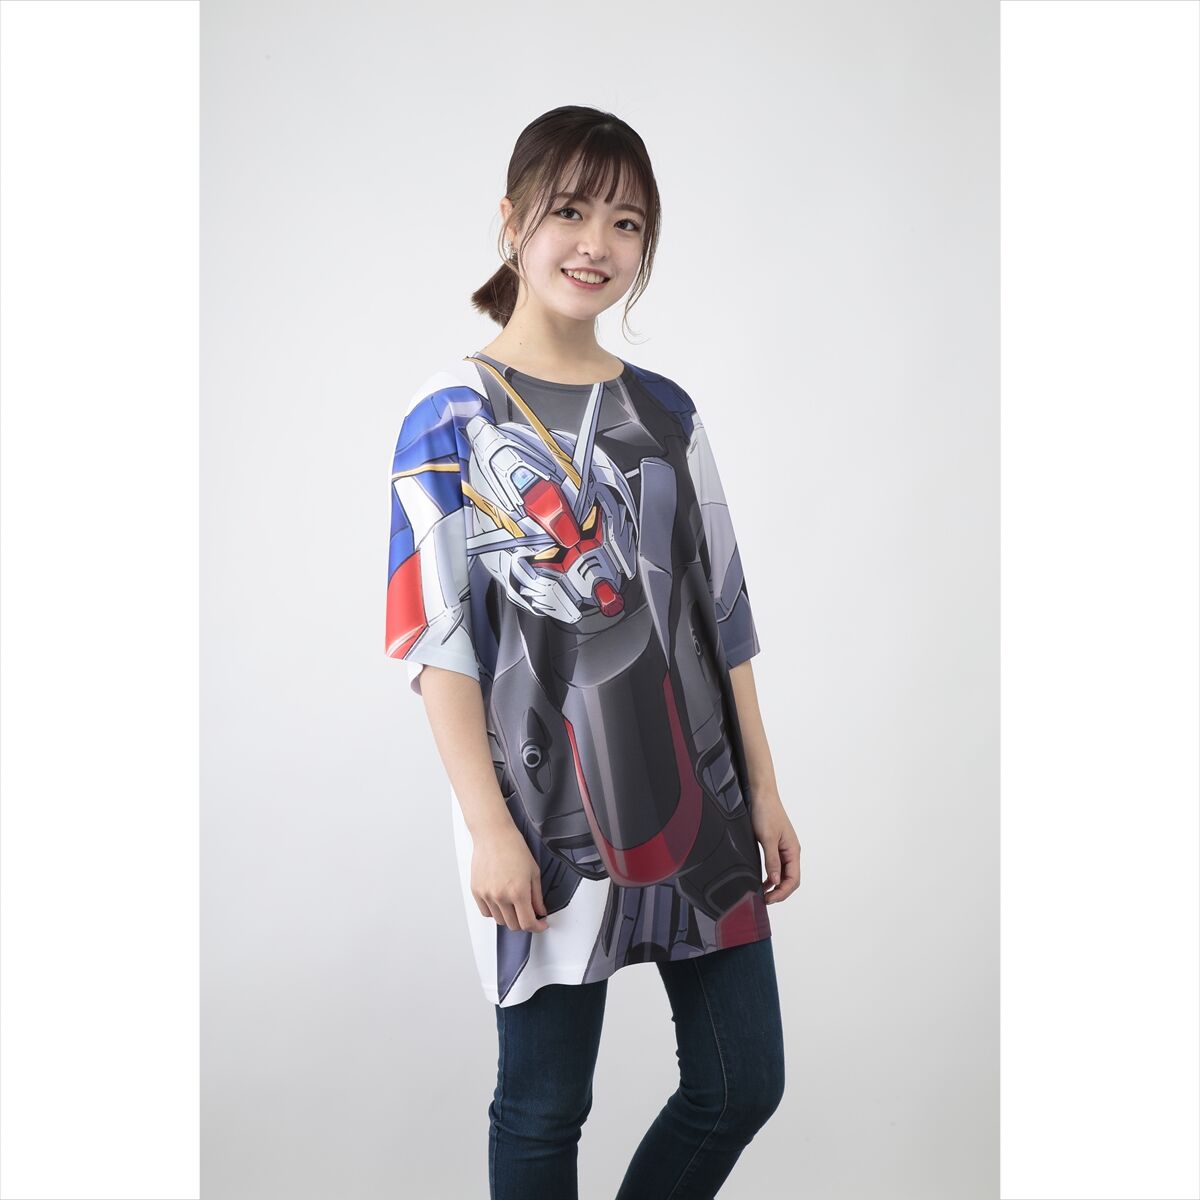 Mobile Suit Gundam SEED All-Over Print T-shirt